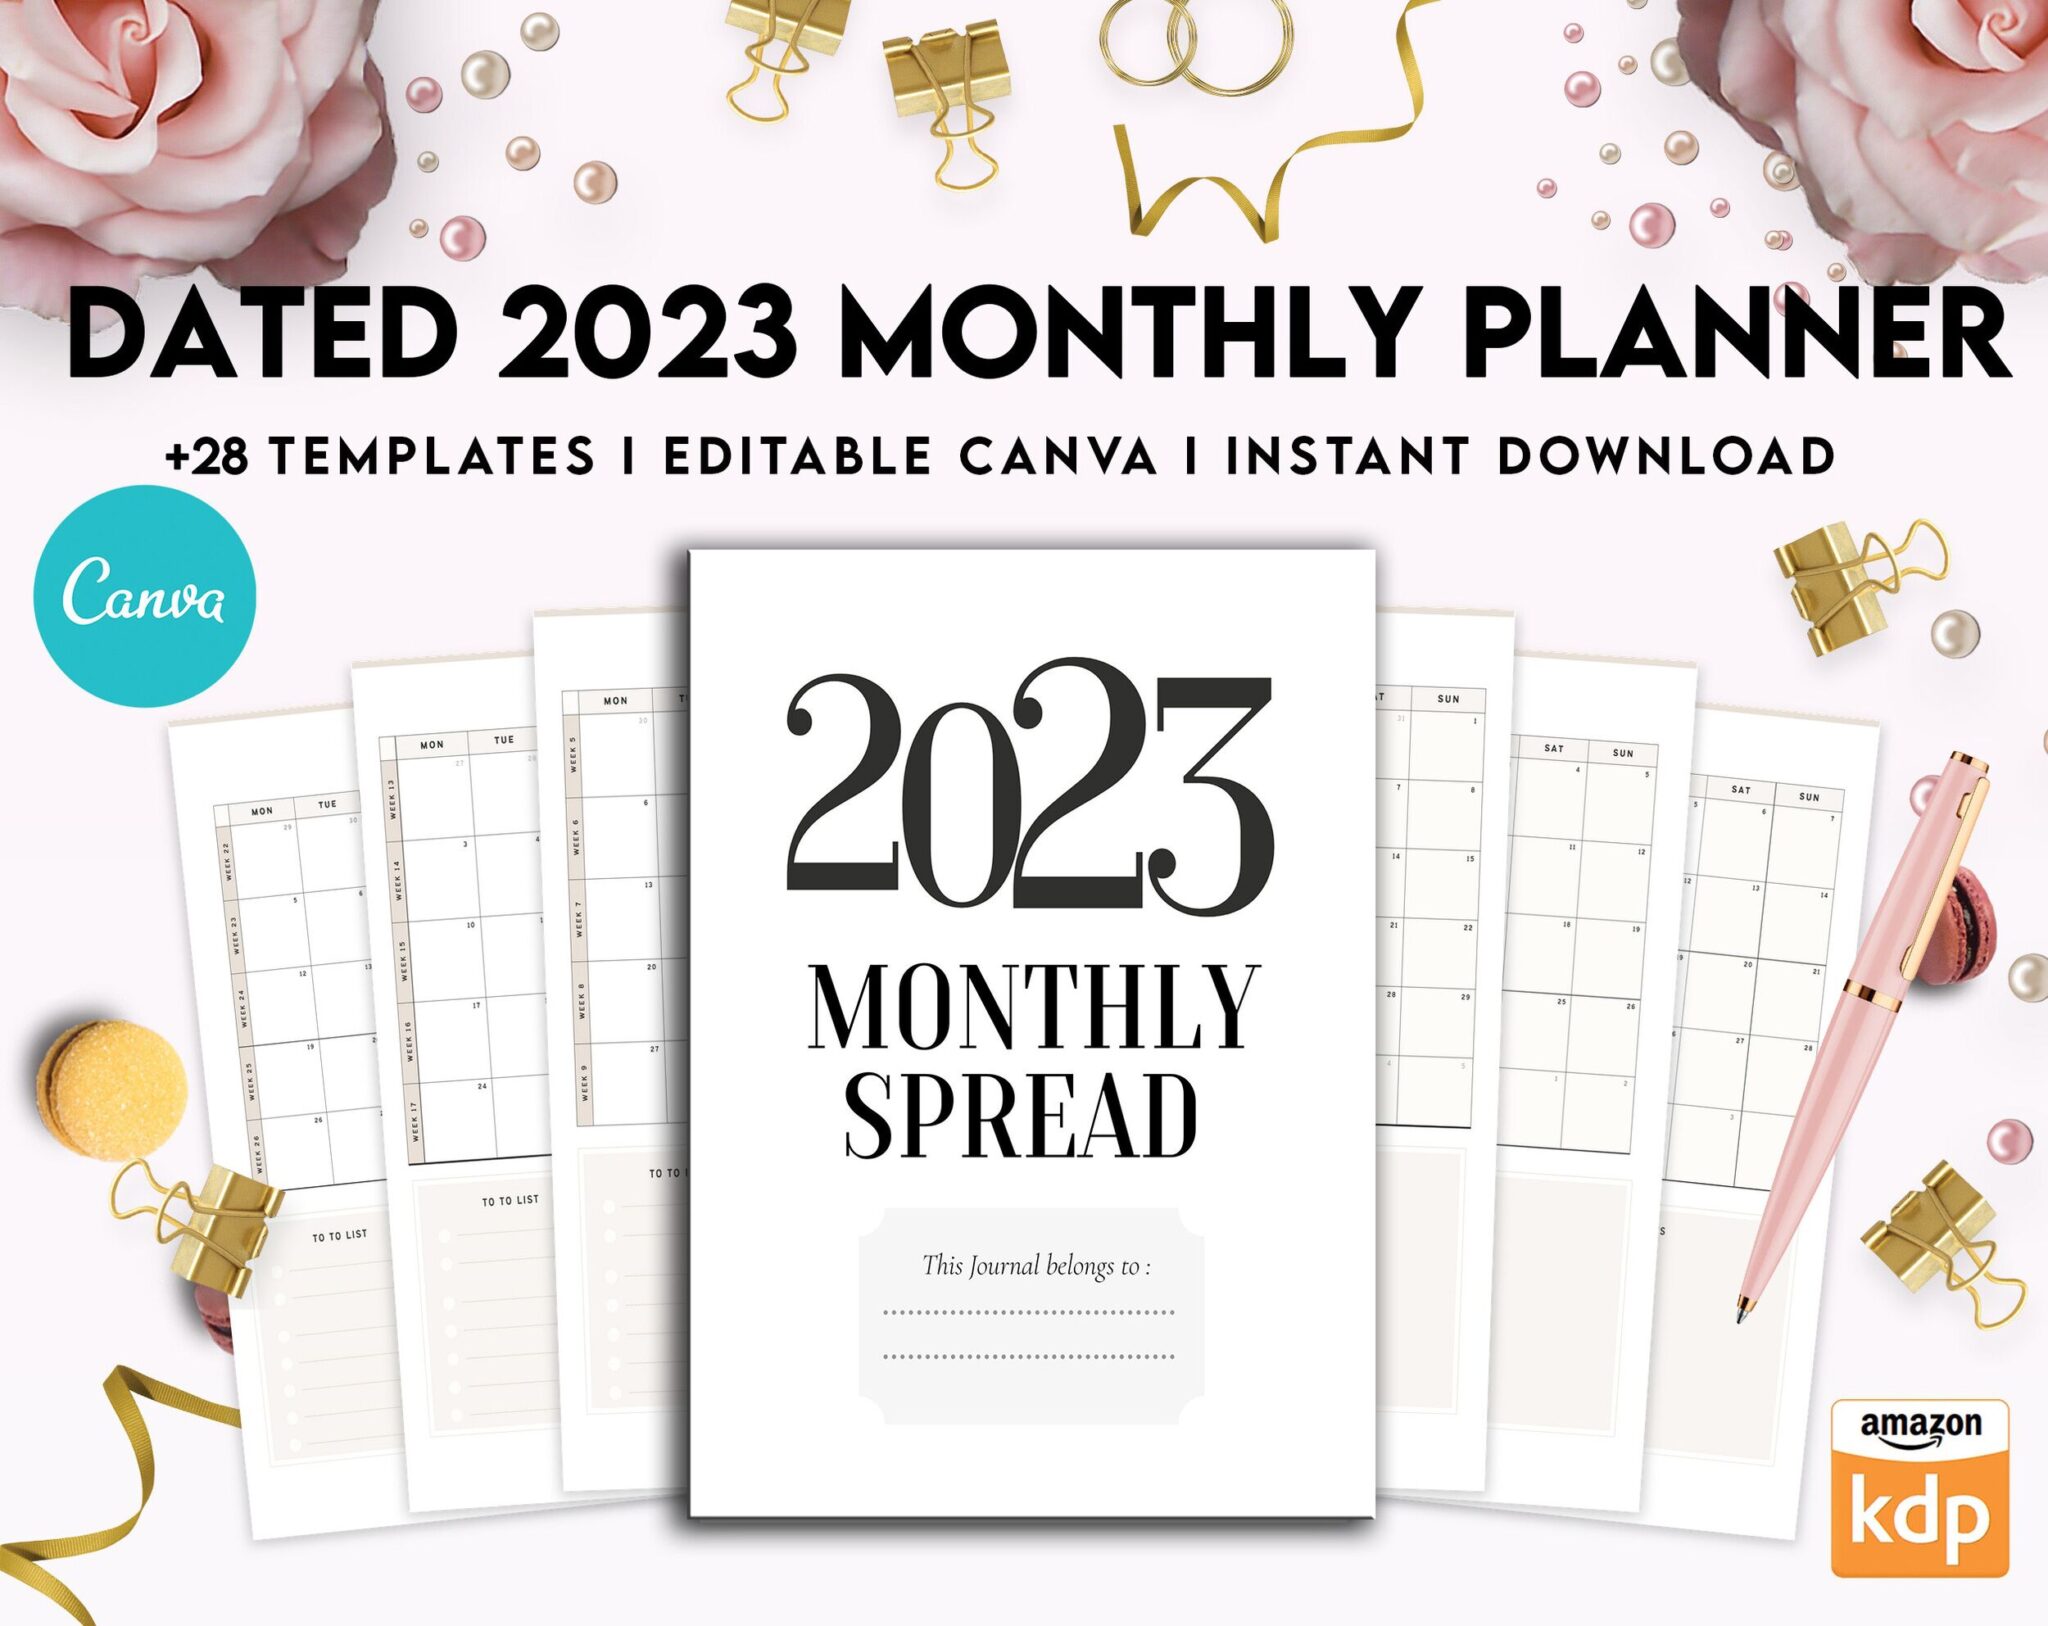 Dated 2023 Monthly Planner 28 Canva Templates 85x11 Printable And